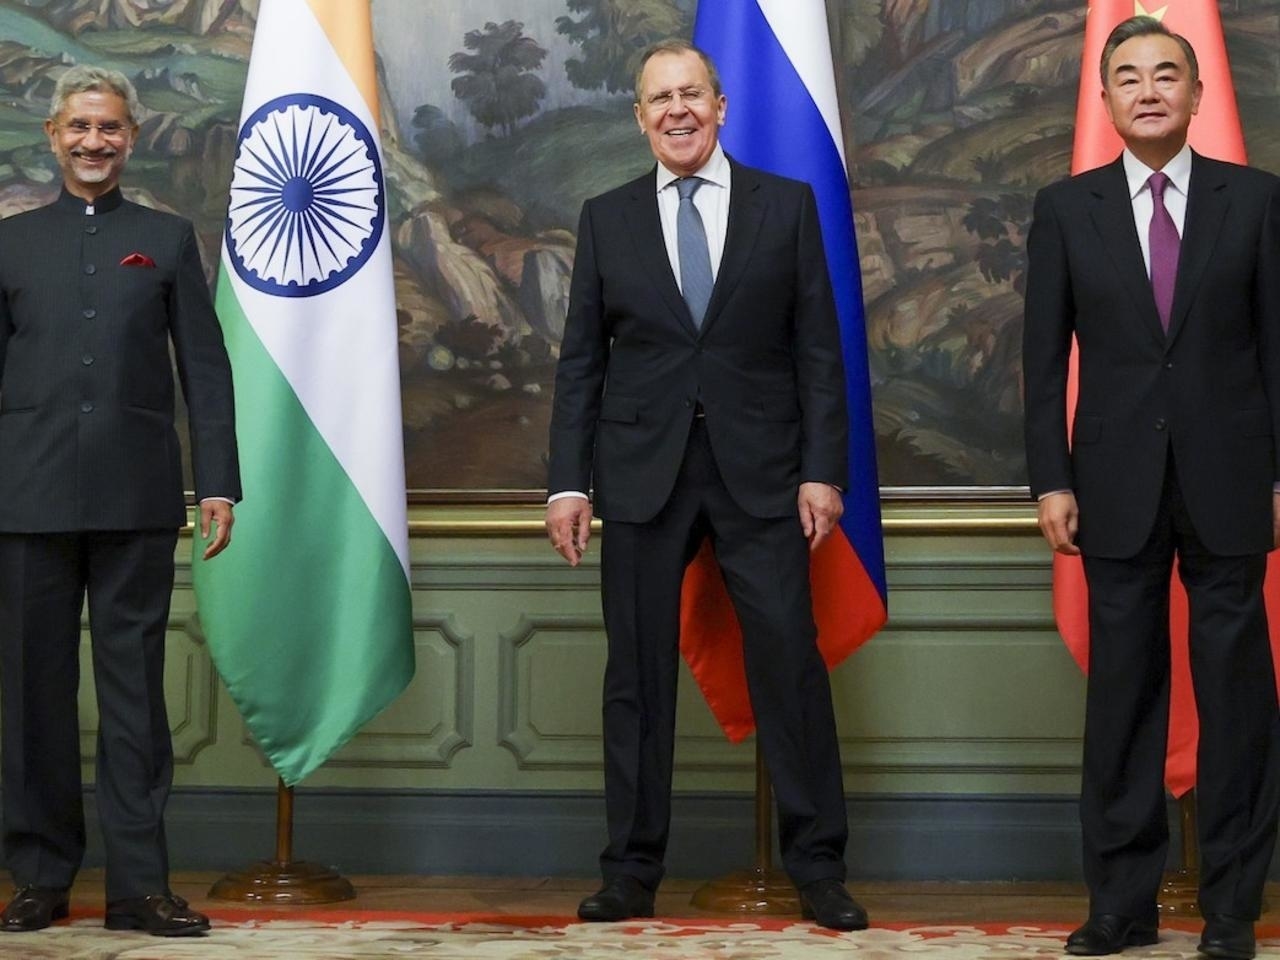 China, India De-Escalate Border Tension After Russia Meeting